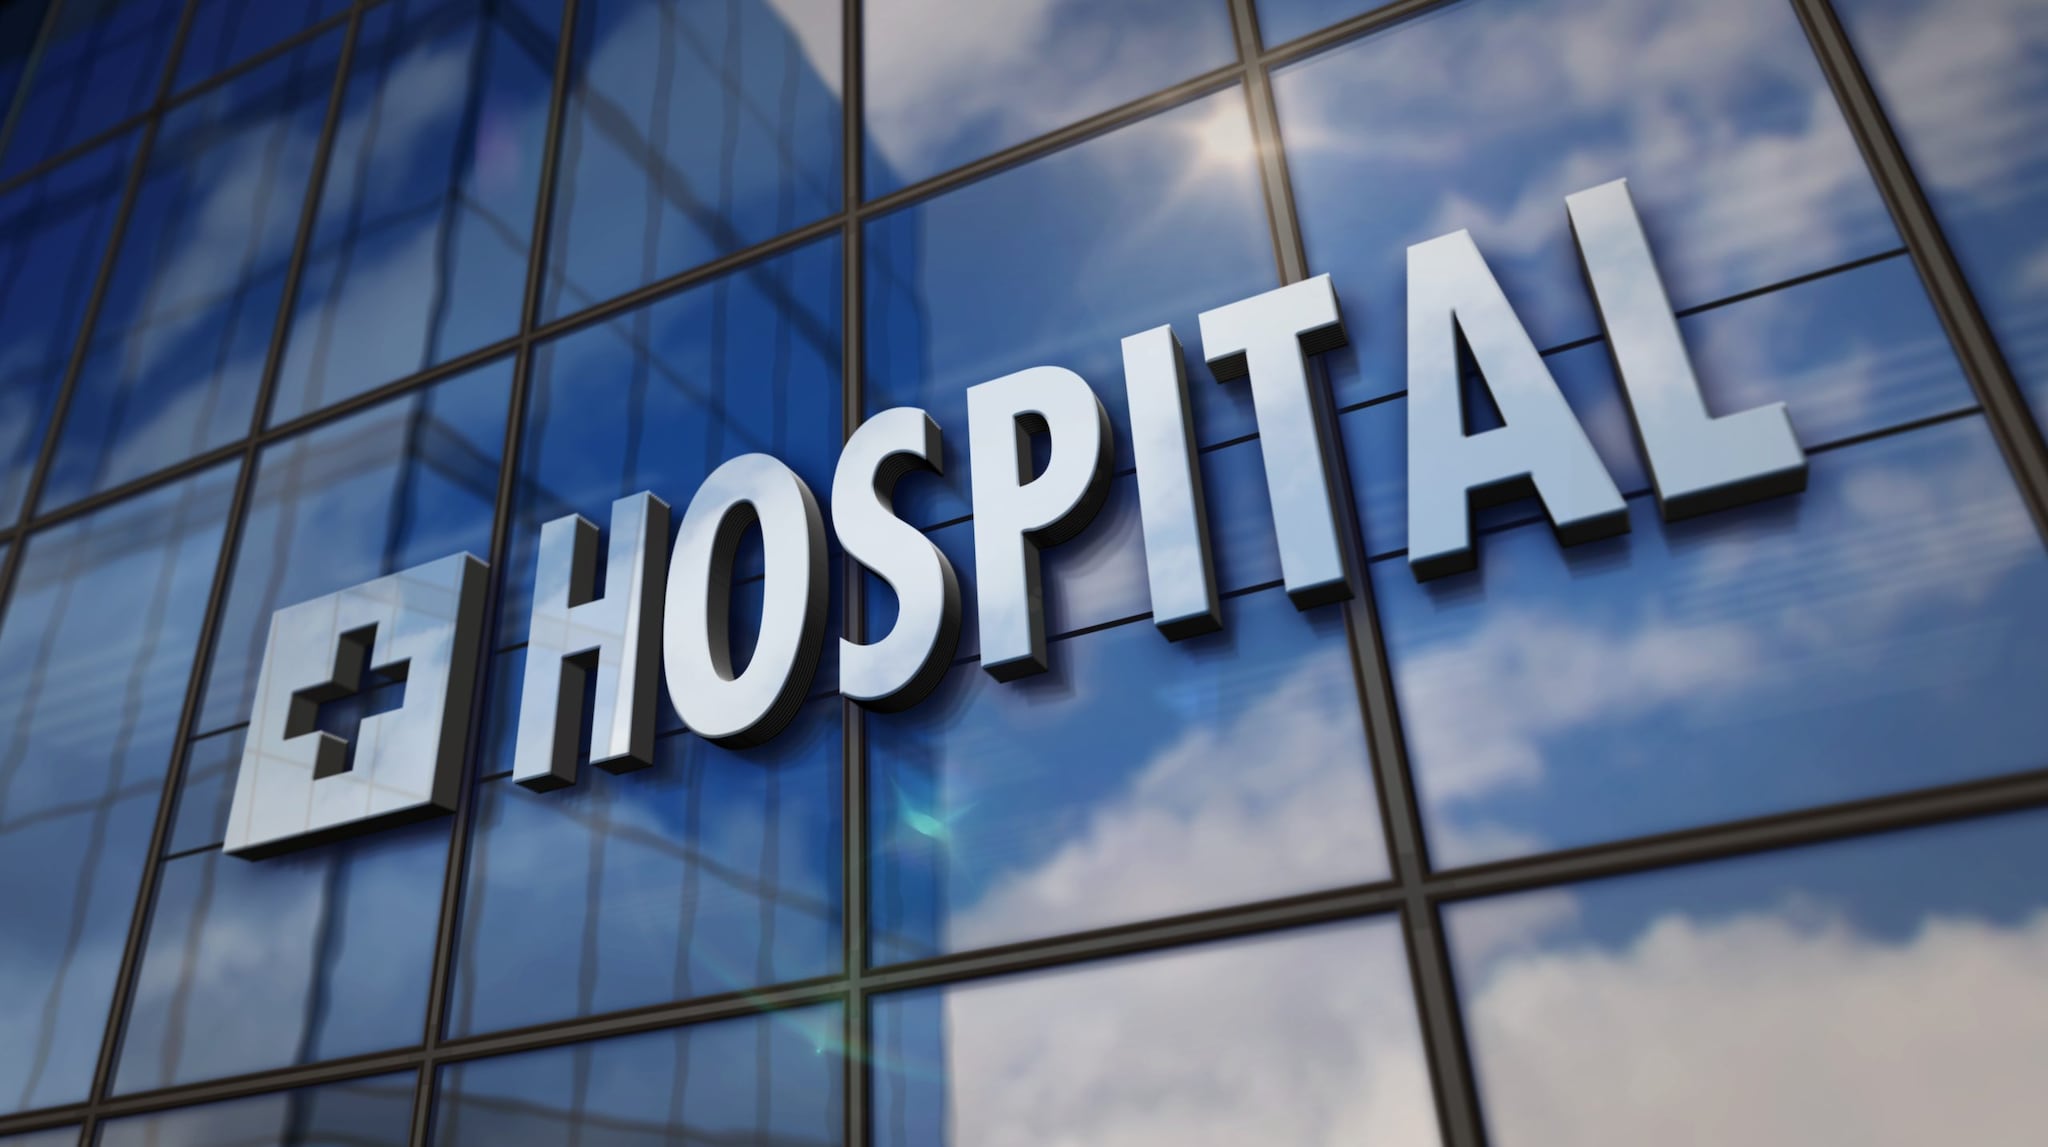 Building with hospital sign.